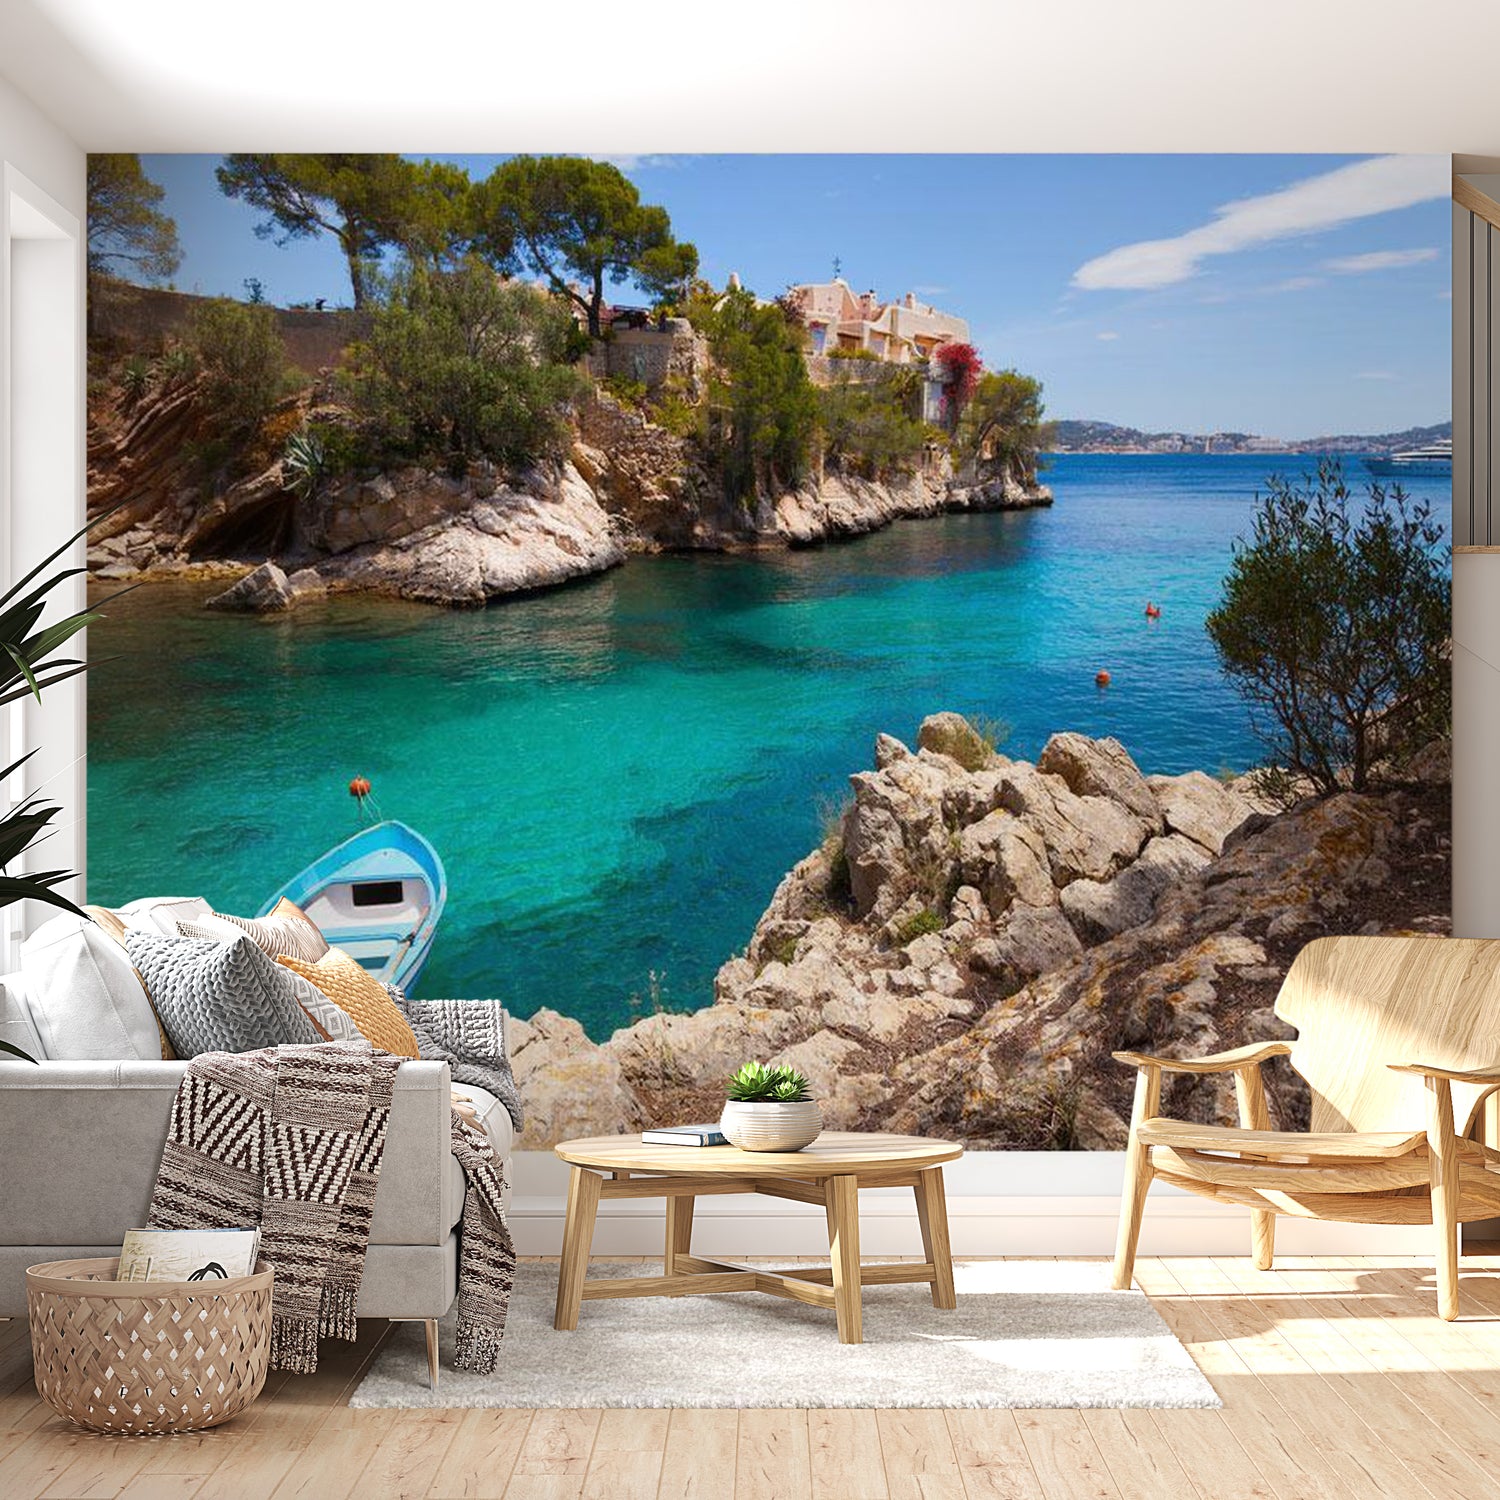 Peel & Stick Tropical Wall Mural - Holiday Seclusion - Removable Wall Decals